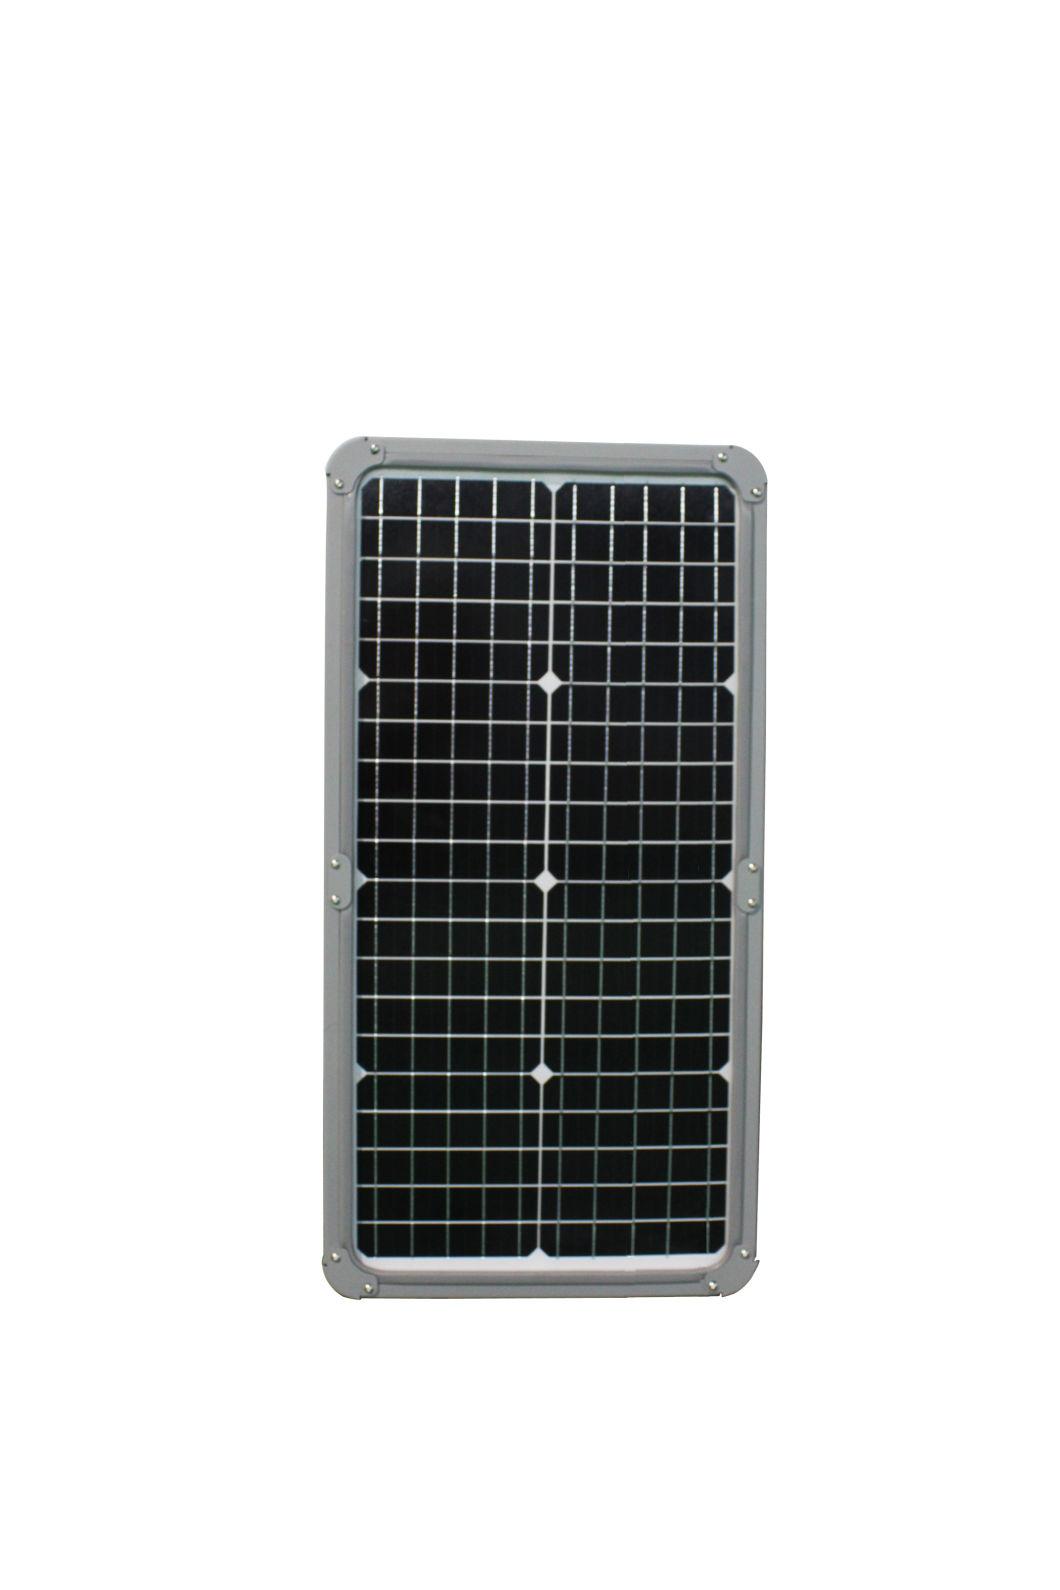 China Wholesale Good Price Outdoor Integrated All in One 100W Solar LED Street Light